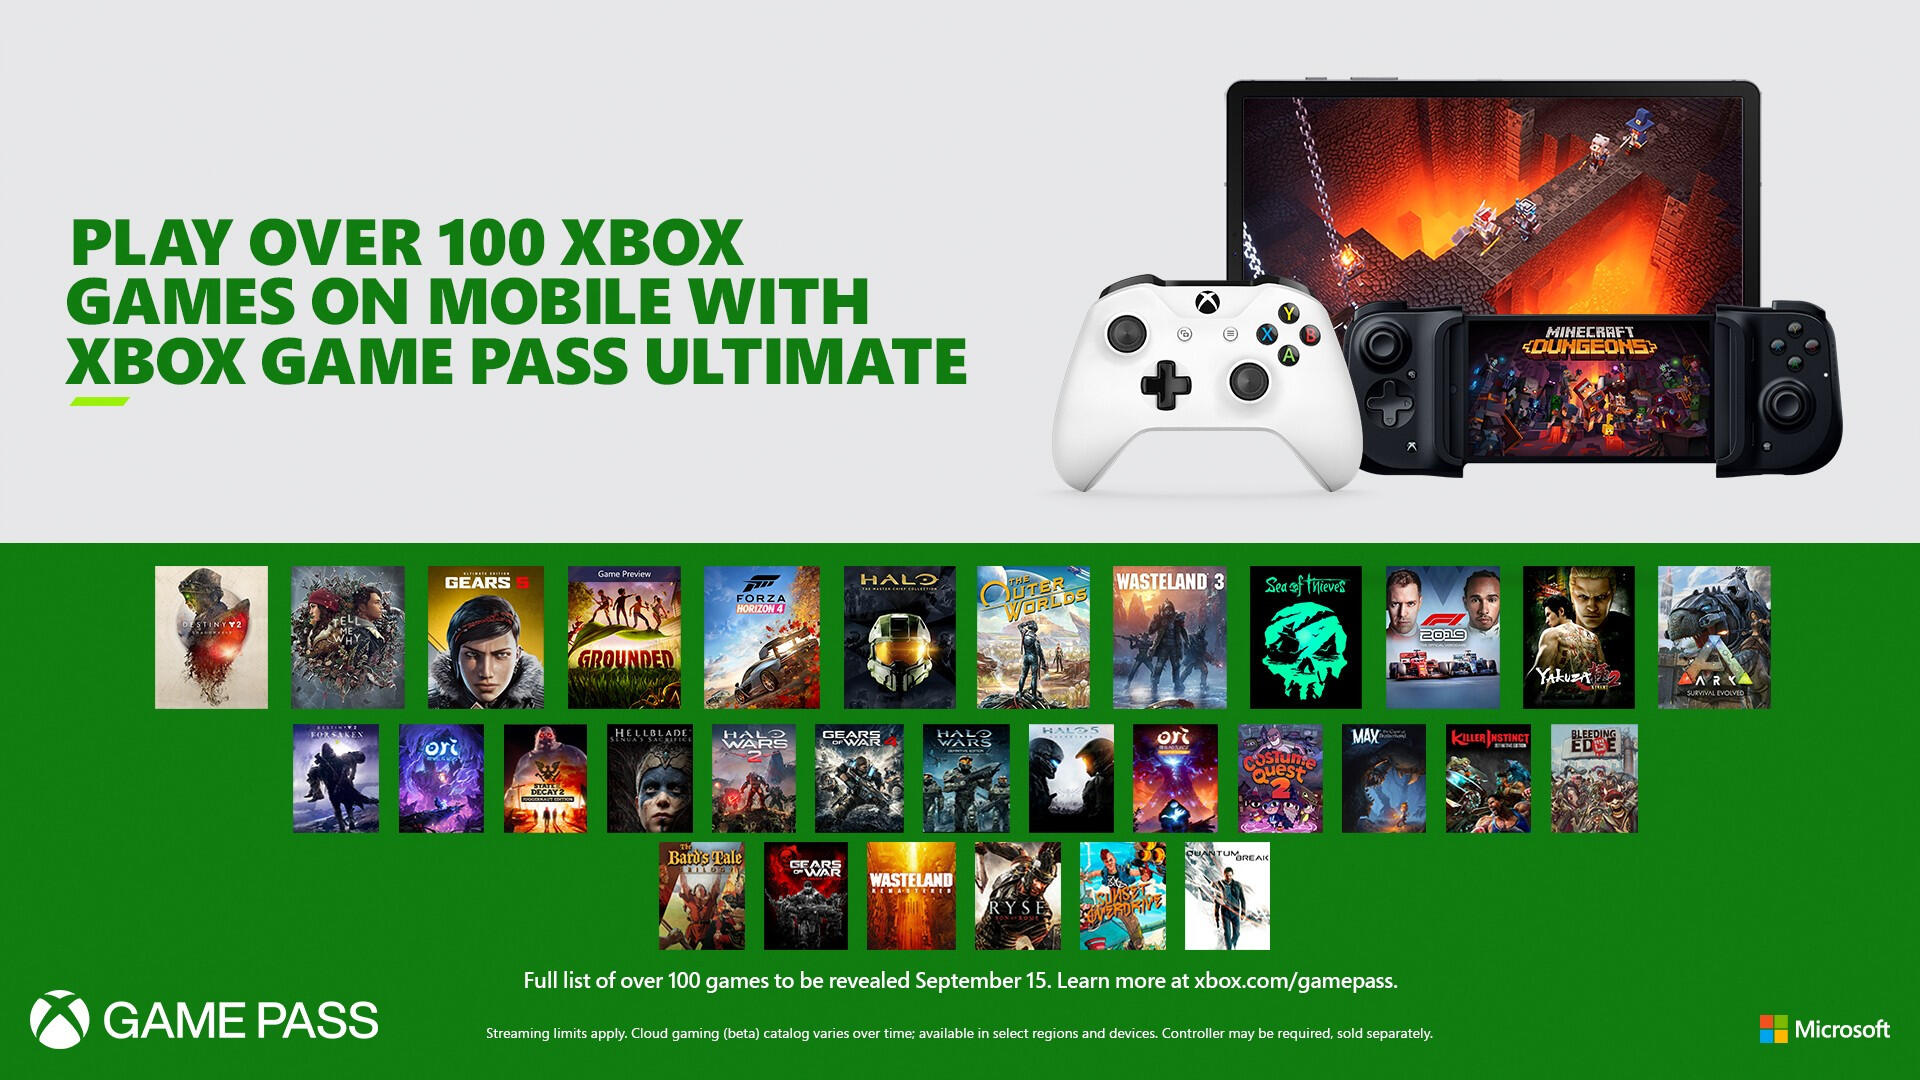 Video Game Gift Guide: Xbox 360 games, accessories